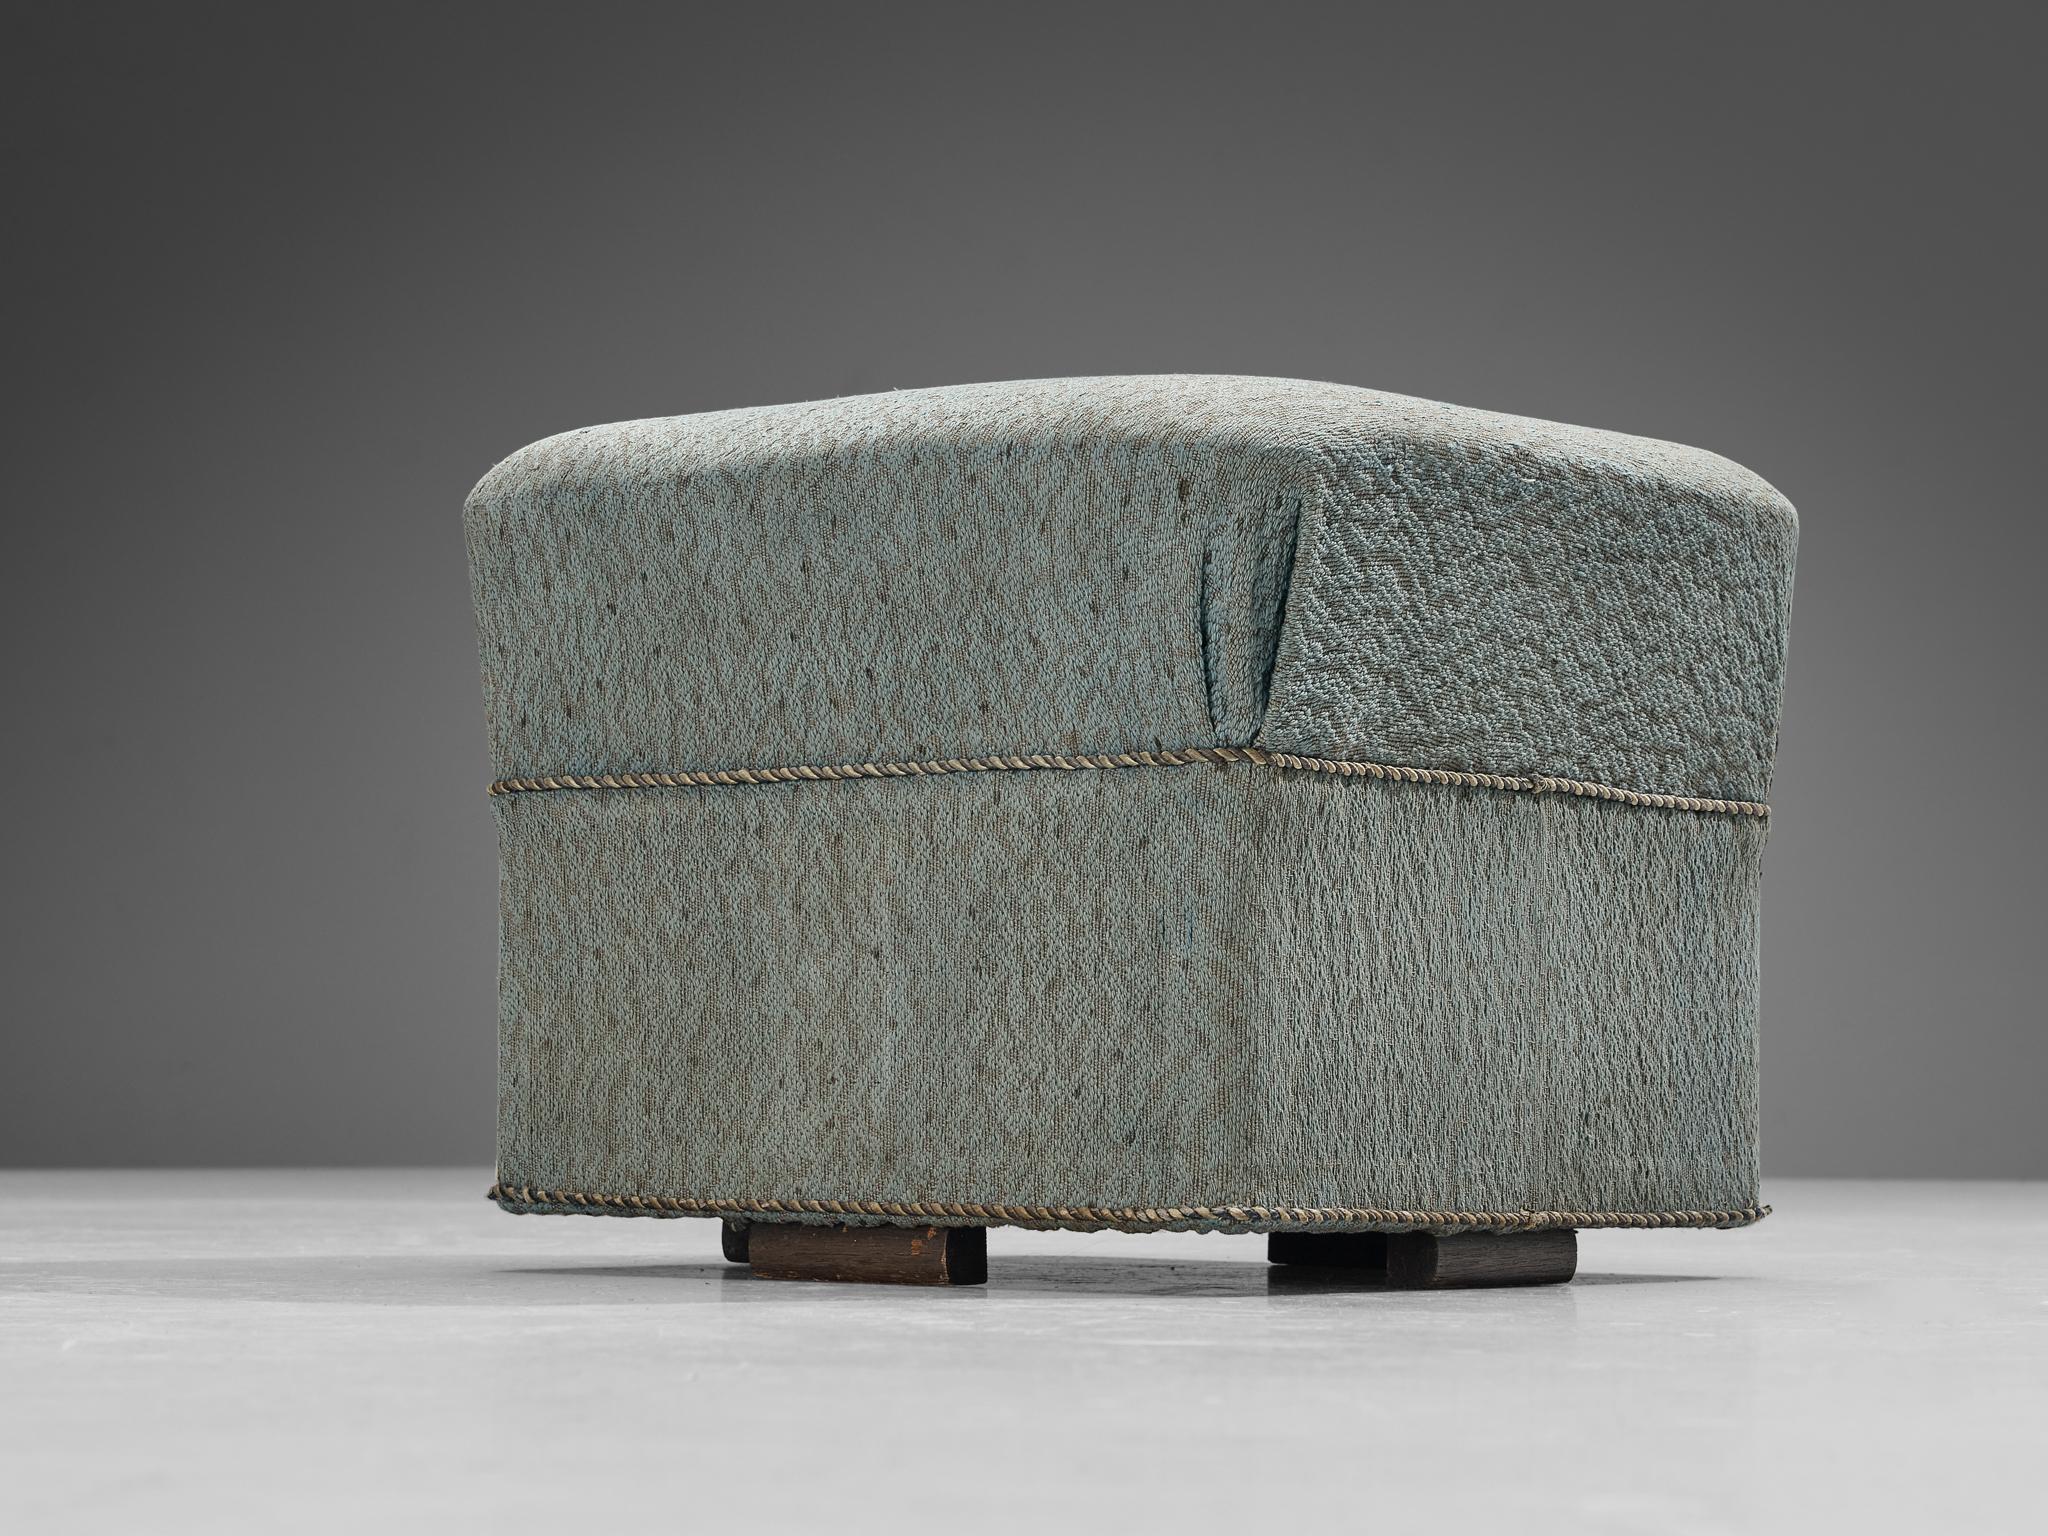 Art Deco Jindrich Halabala Square Stool in Light Blue Upholstery For Sale